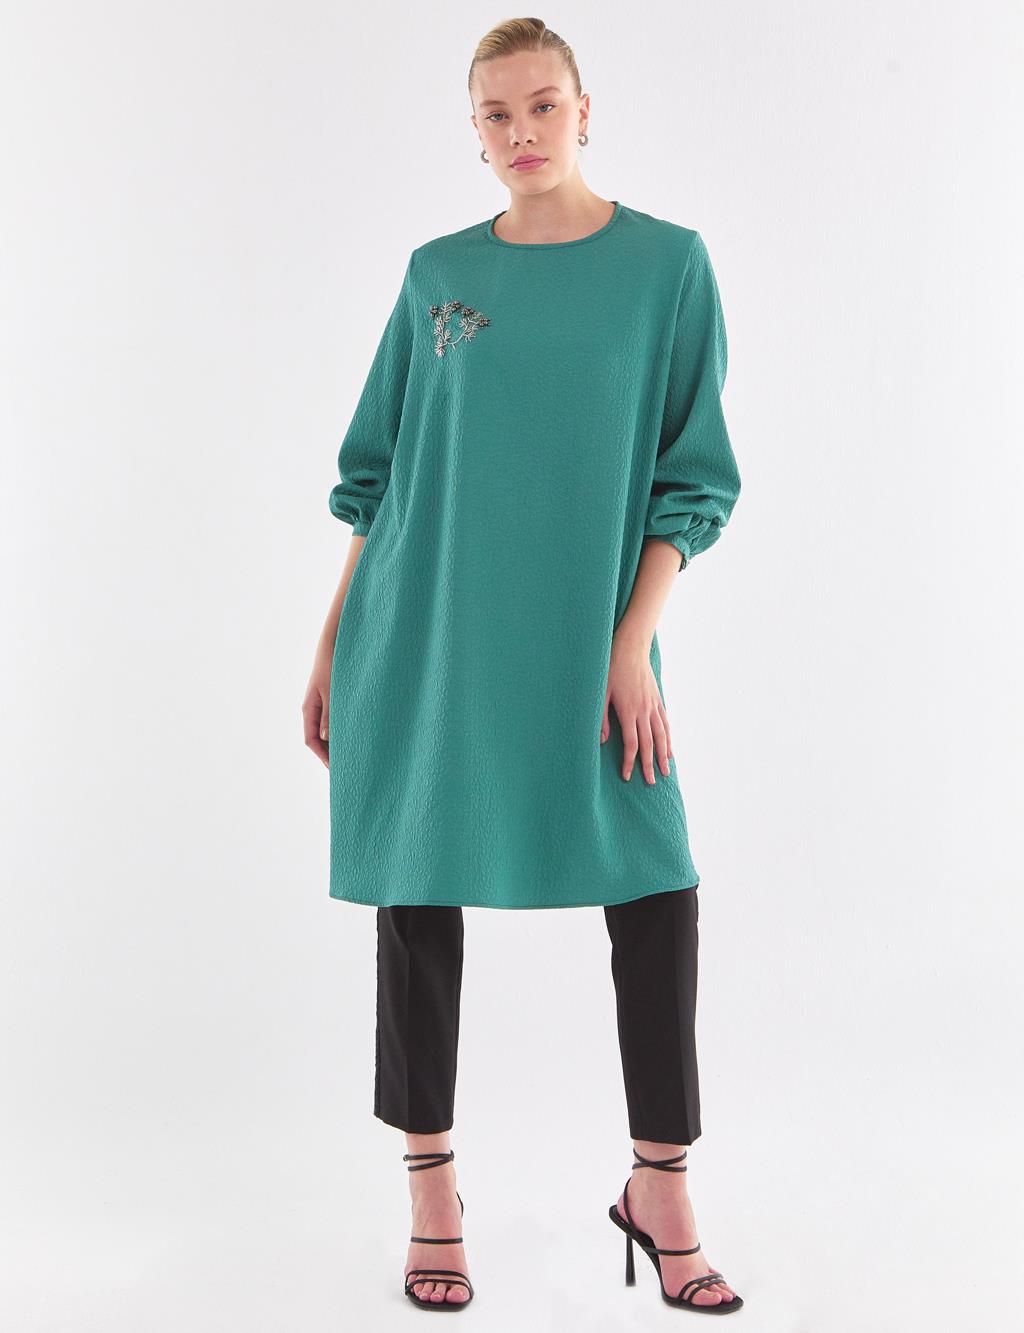 Embroidered Relief Pattern Tunic Lake Green